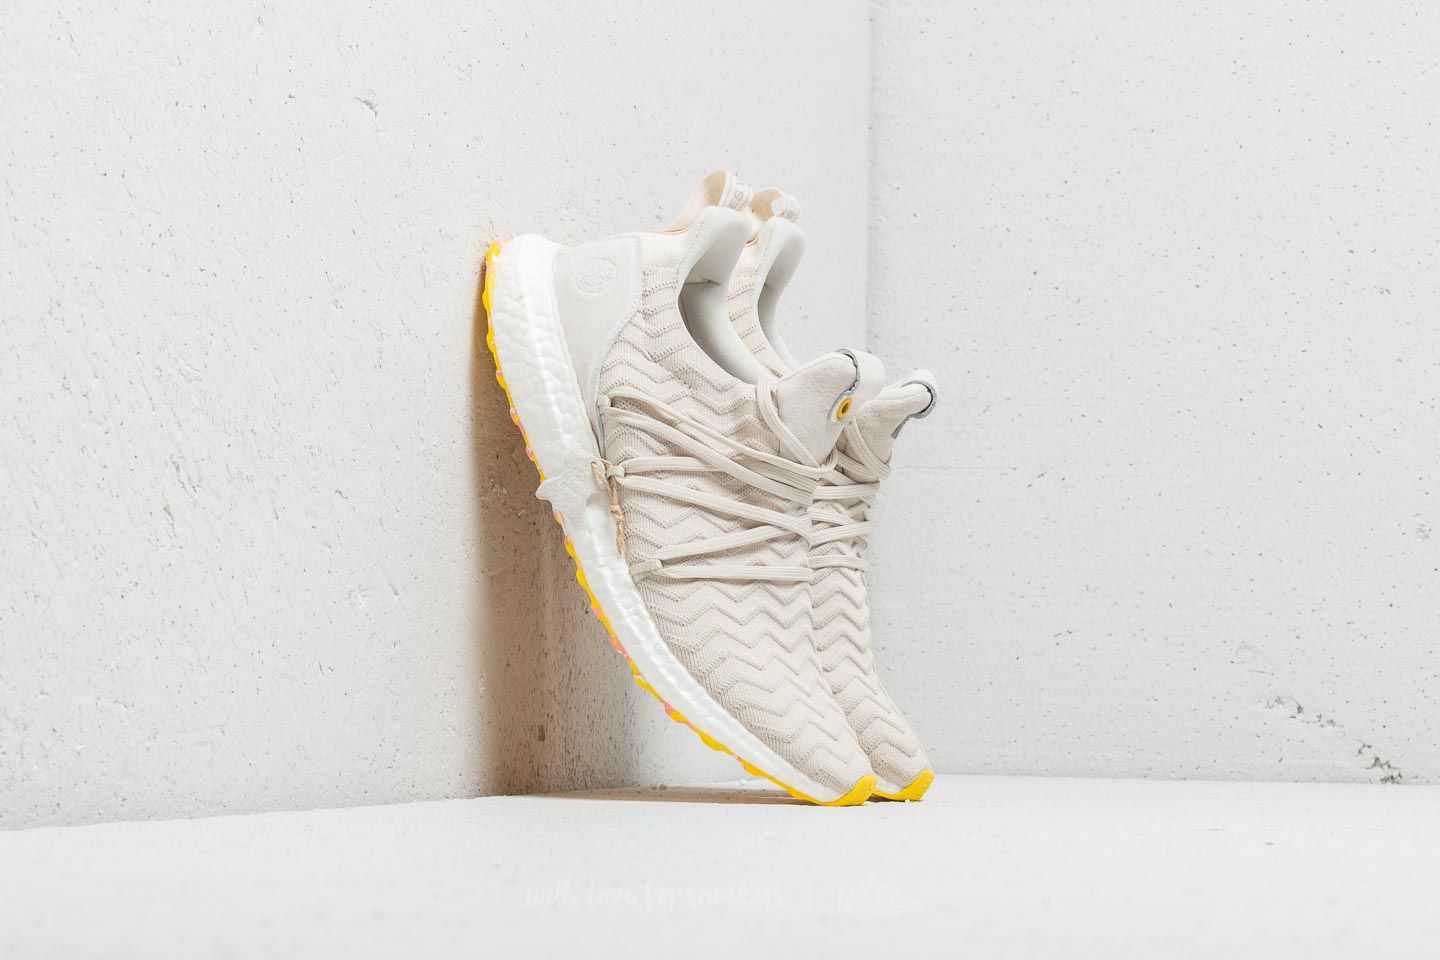 Buty męskie adidas Consortium x A Kind of Guise UltraBOOST Chalk White/ Yellow